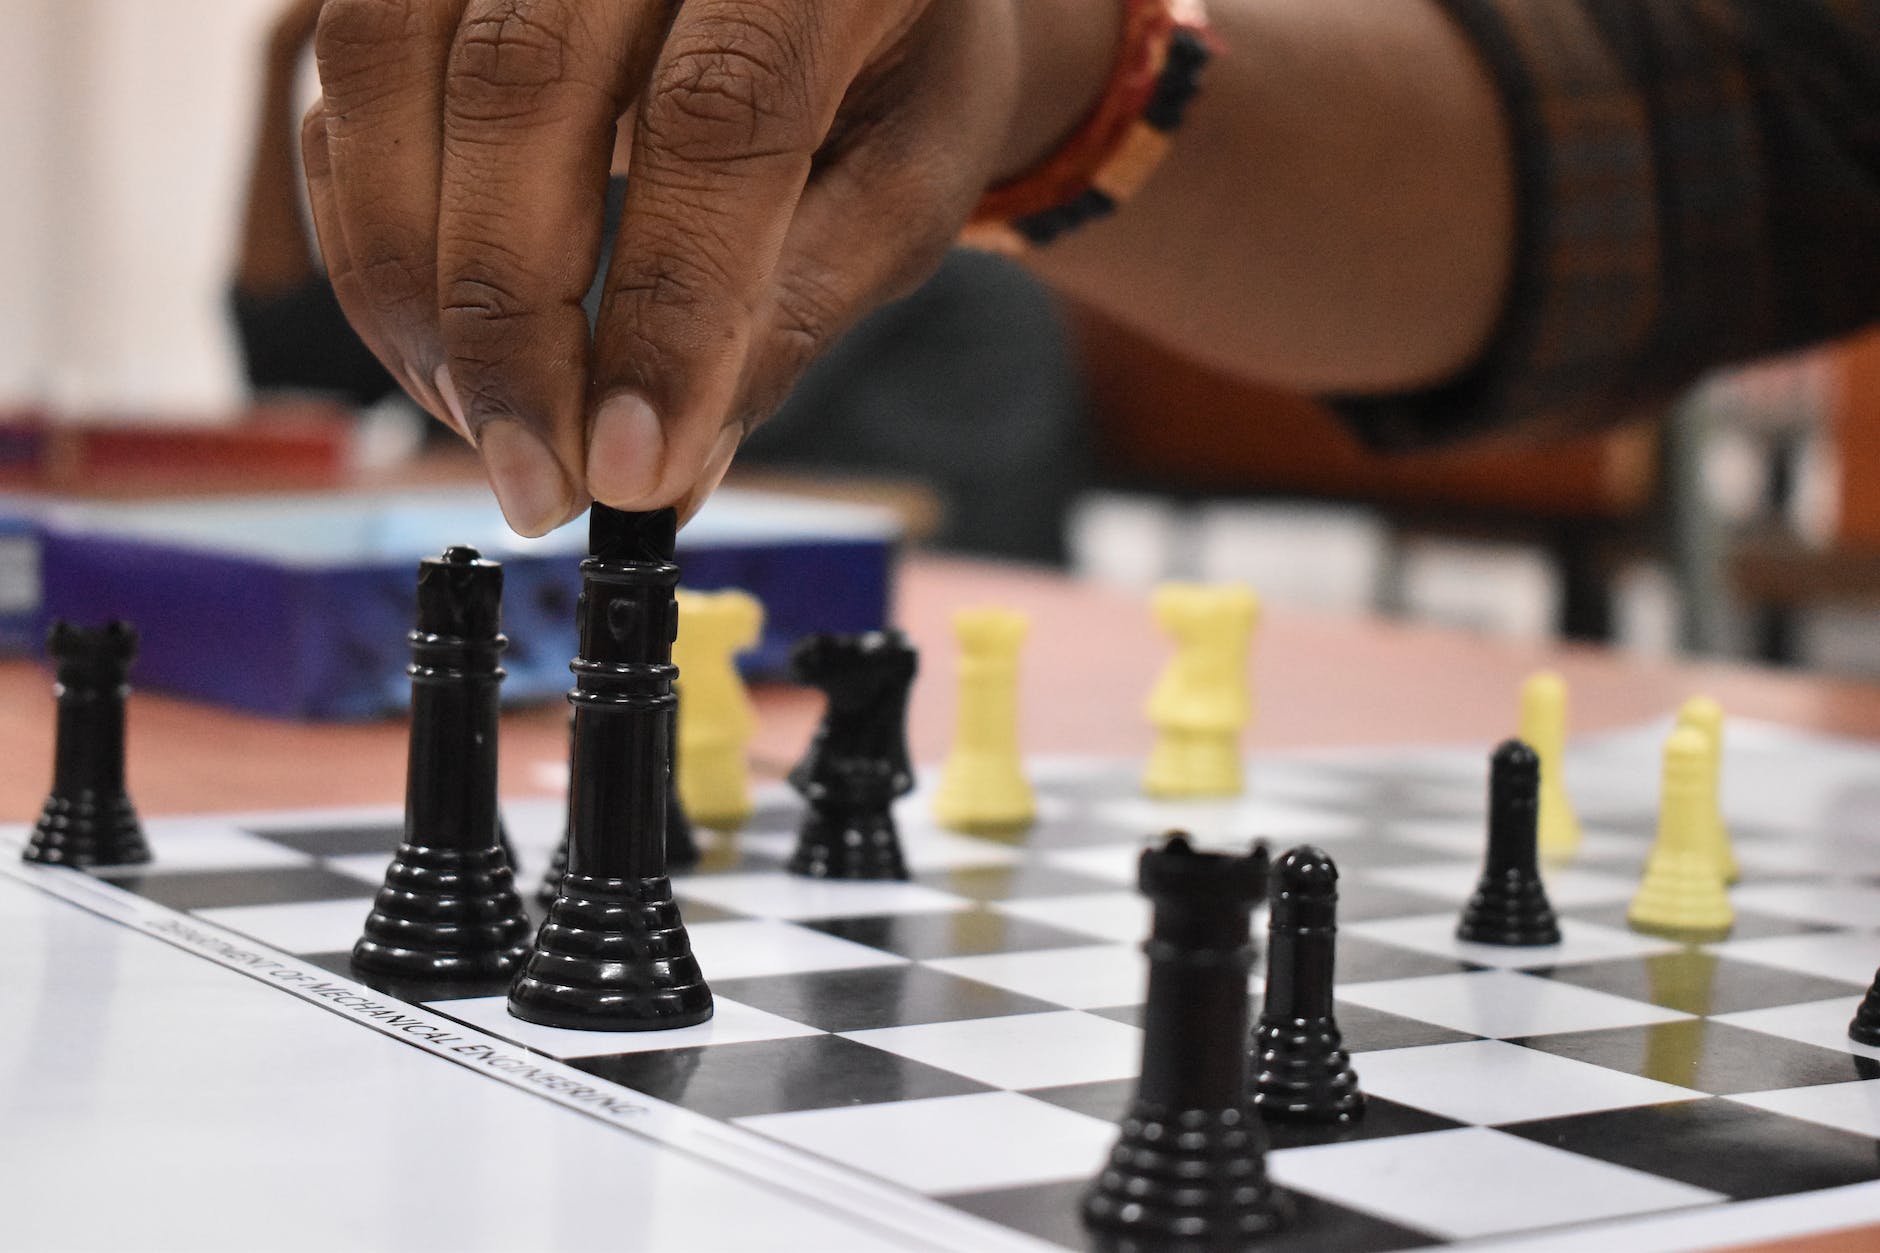 black and yellow chess pieces

Conclusion: Why is critical thinking important in decision-making?